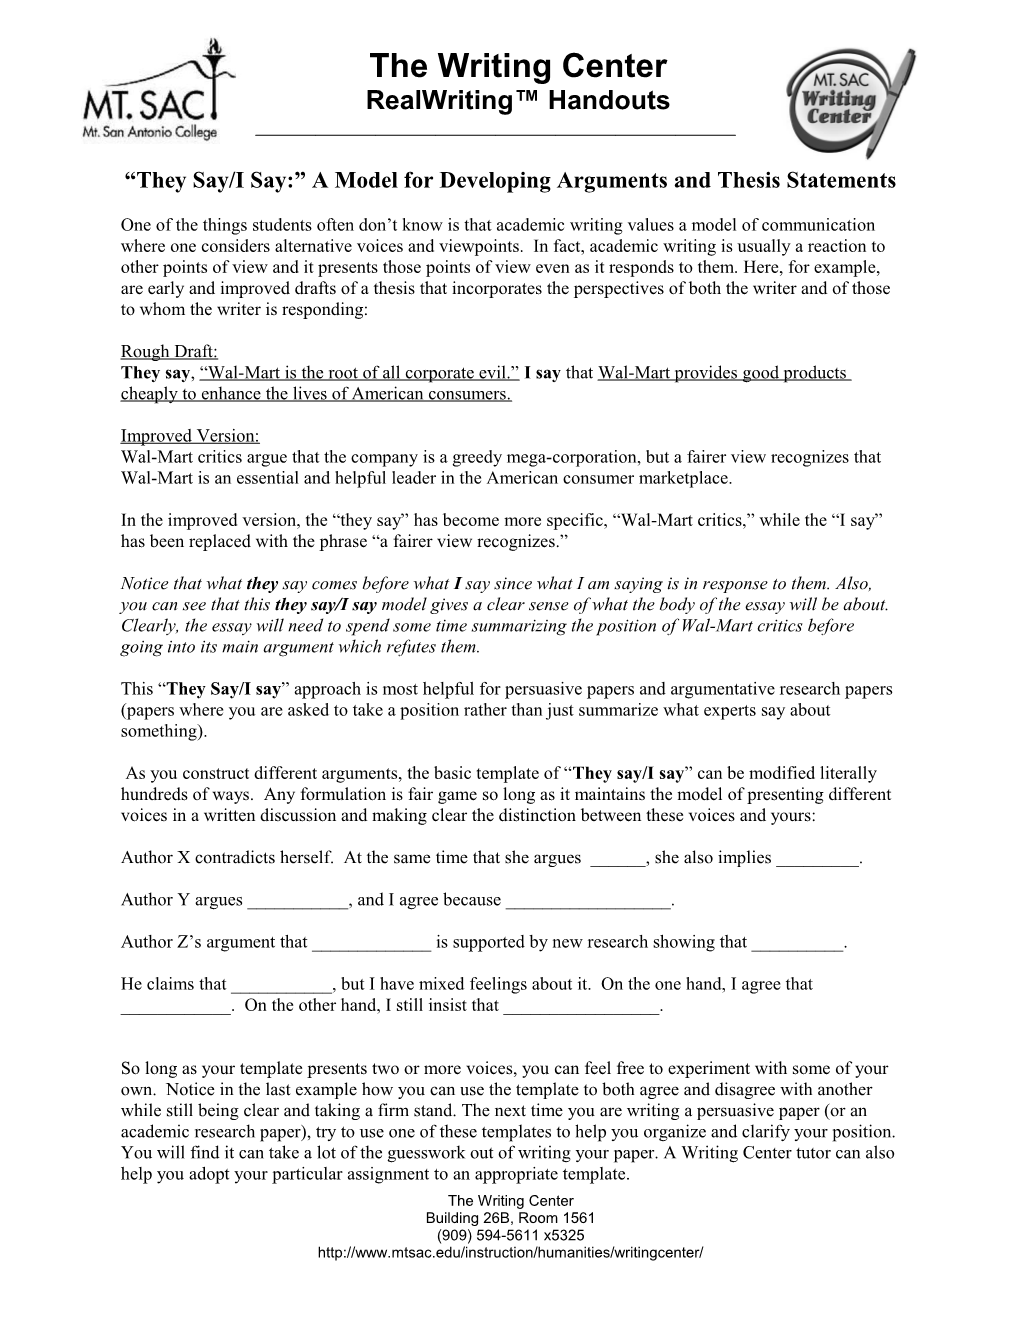 “They Say/I Say:” A Model For Developing Arguments And Thesis Statements